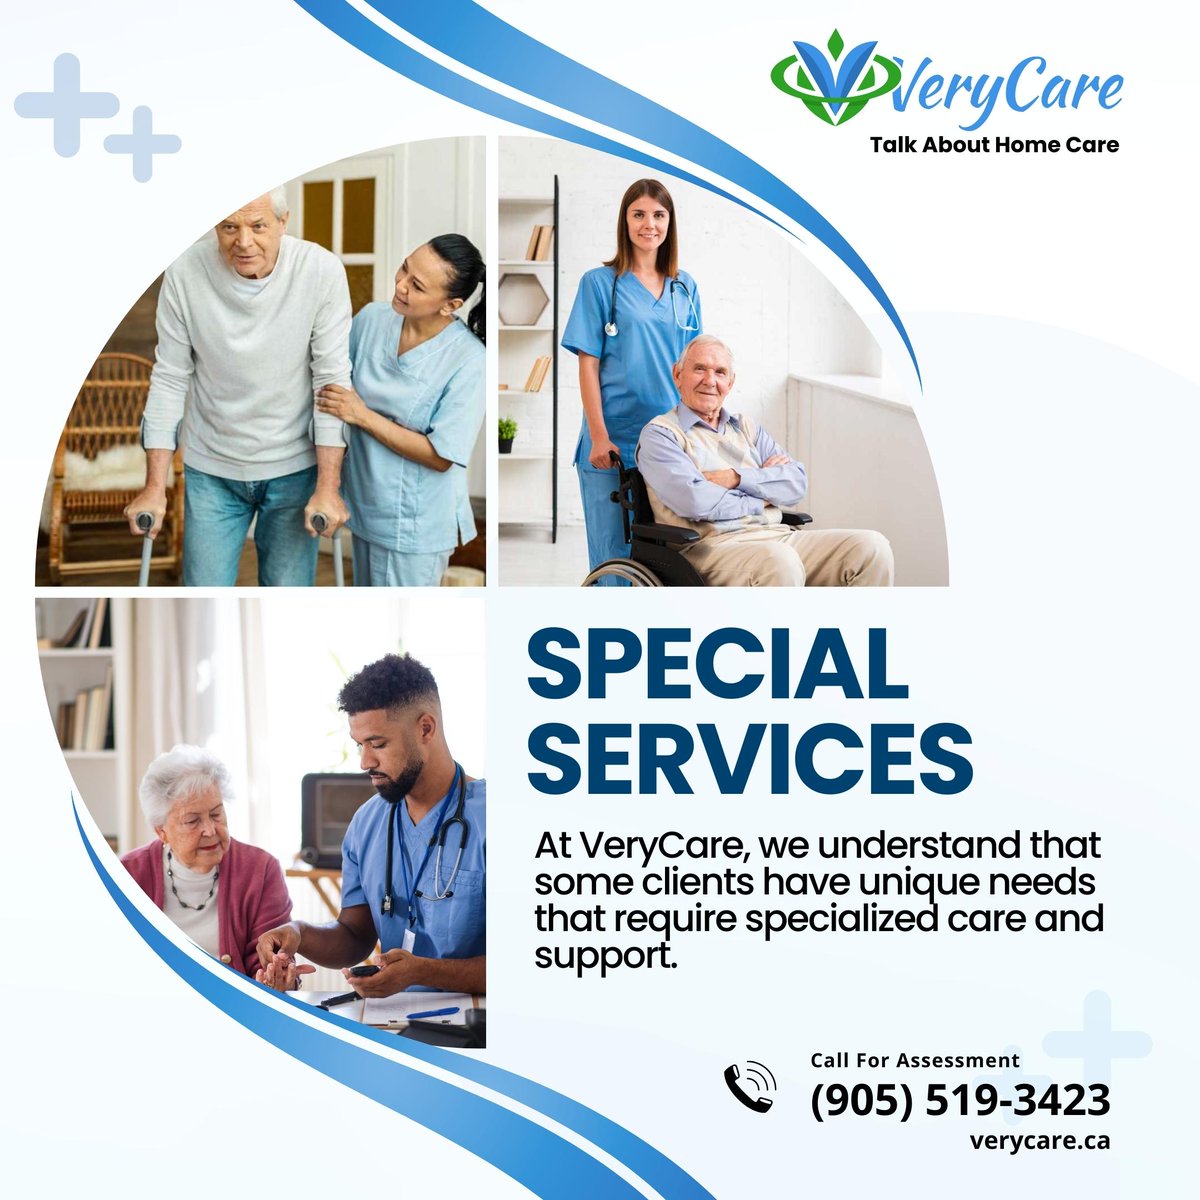 At VeryCare, we recognize that some clients have unique needs that require specialized care and attention. We're here to provide the tailored support you deserve. 📷 #SpecializedCare #VeryCare #SeniorLiving #seniorcare #elderlycare #Toronto #Mississauga #TrendingNow #TrendingHot